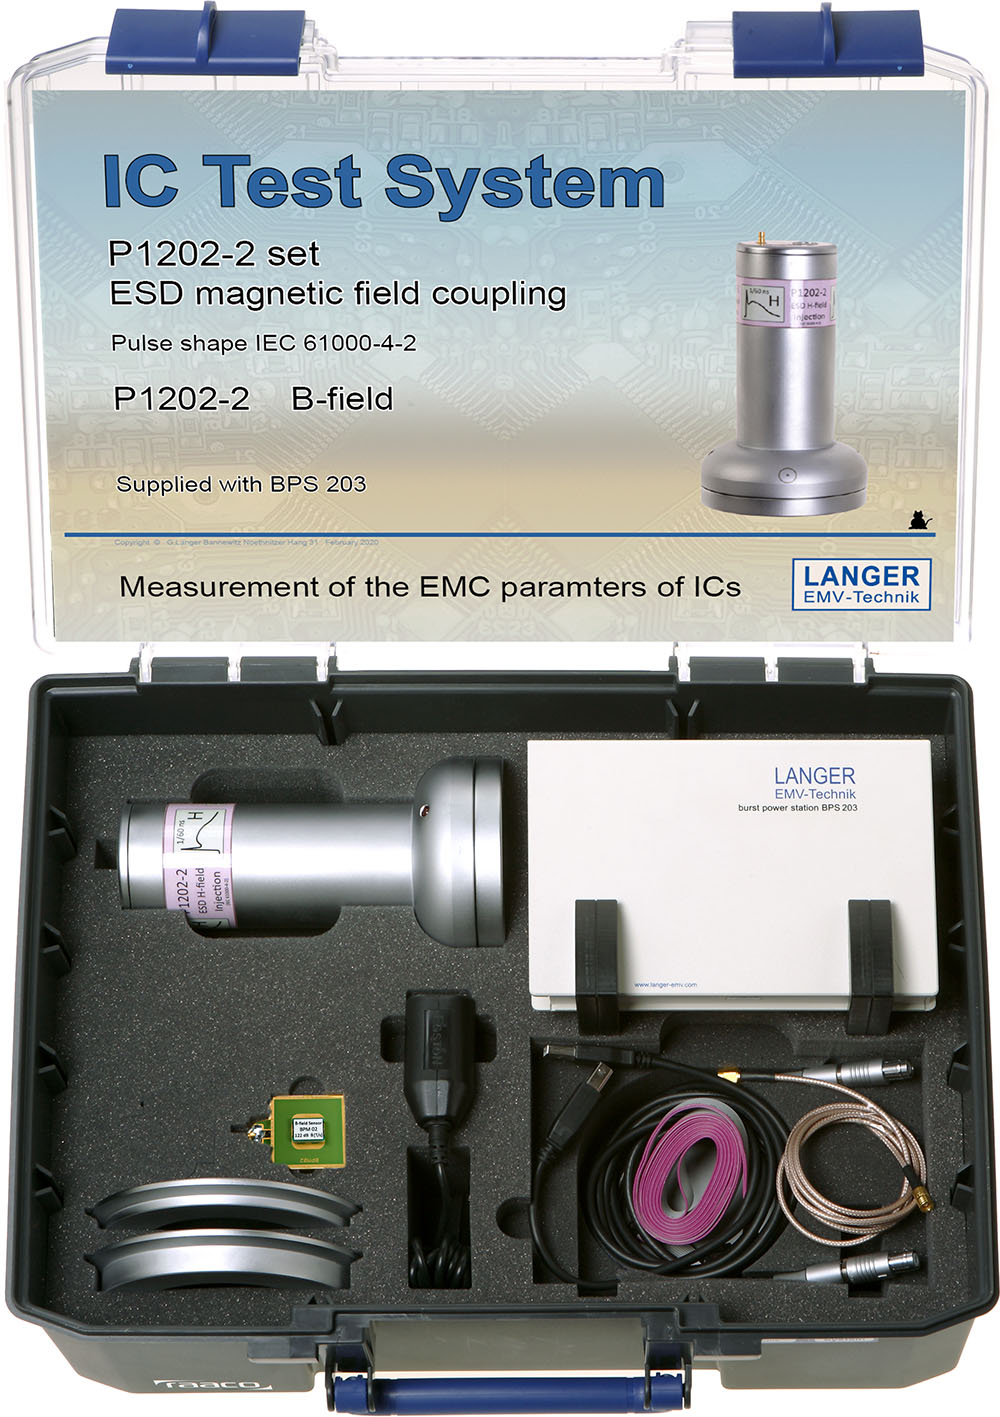 P1202-2 set, ESD Magnetic Field Coupling